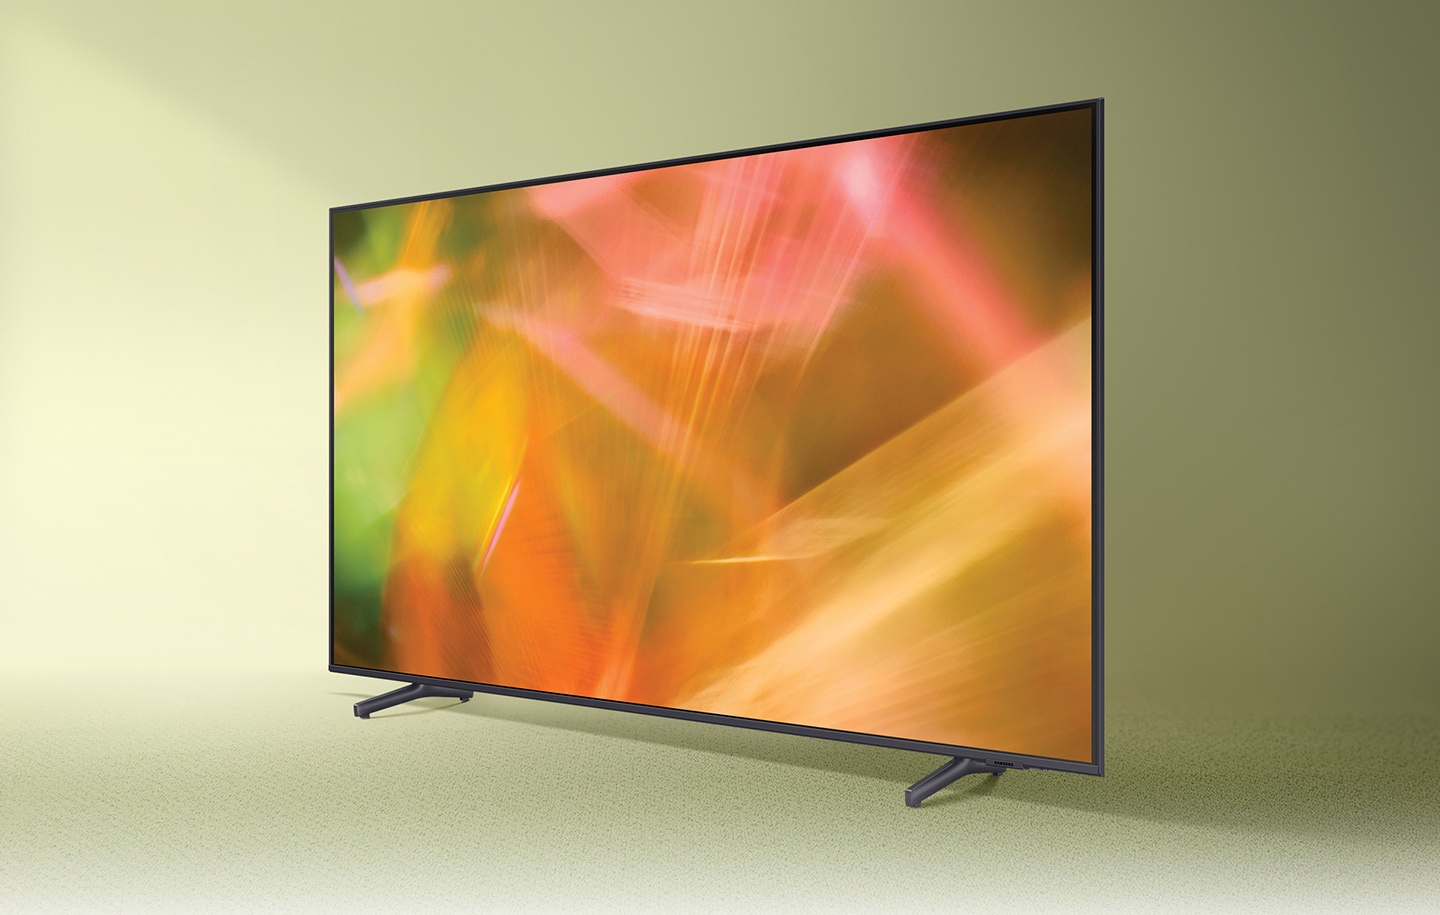 AU8000 displays intricately blended color graphics which demonstrate vivid crystal color.